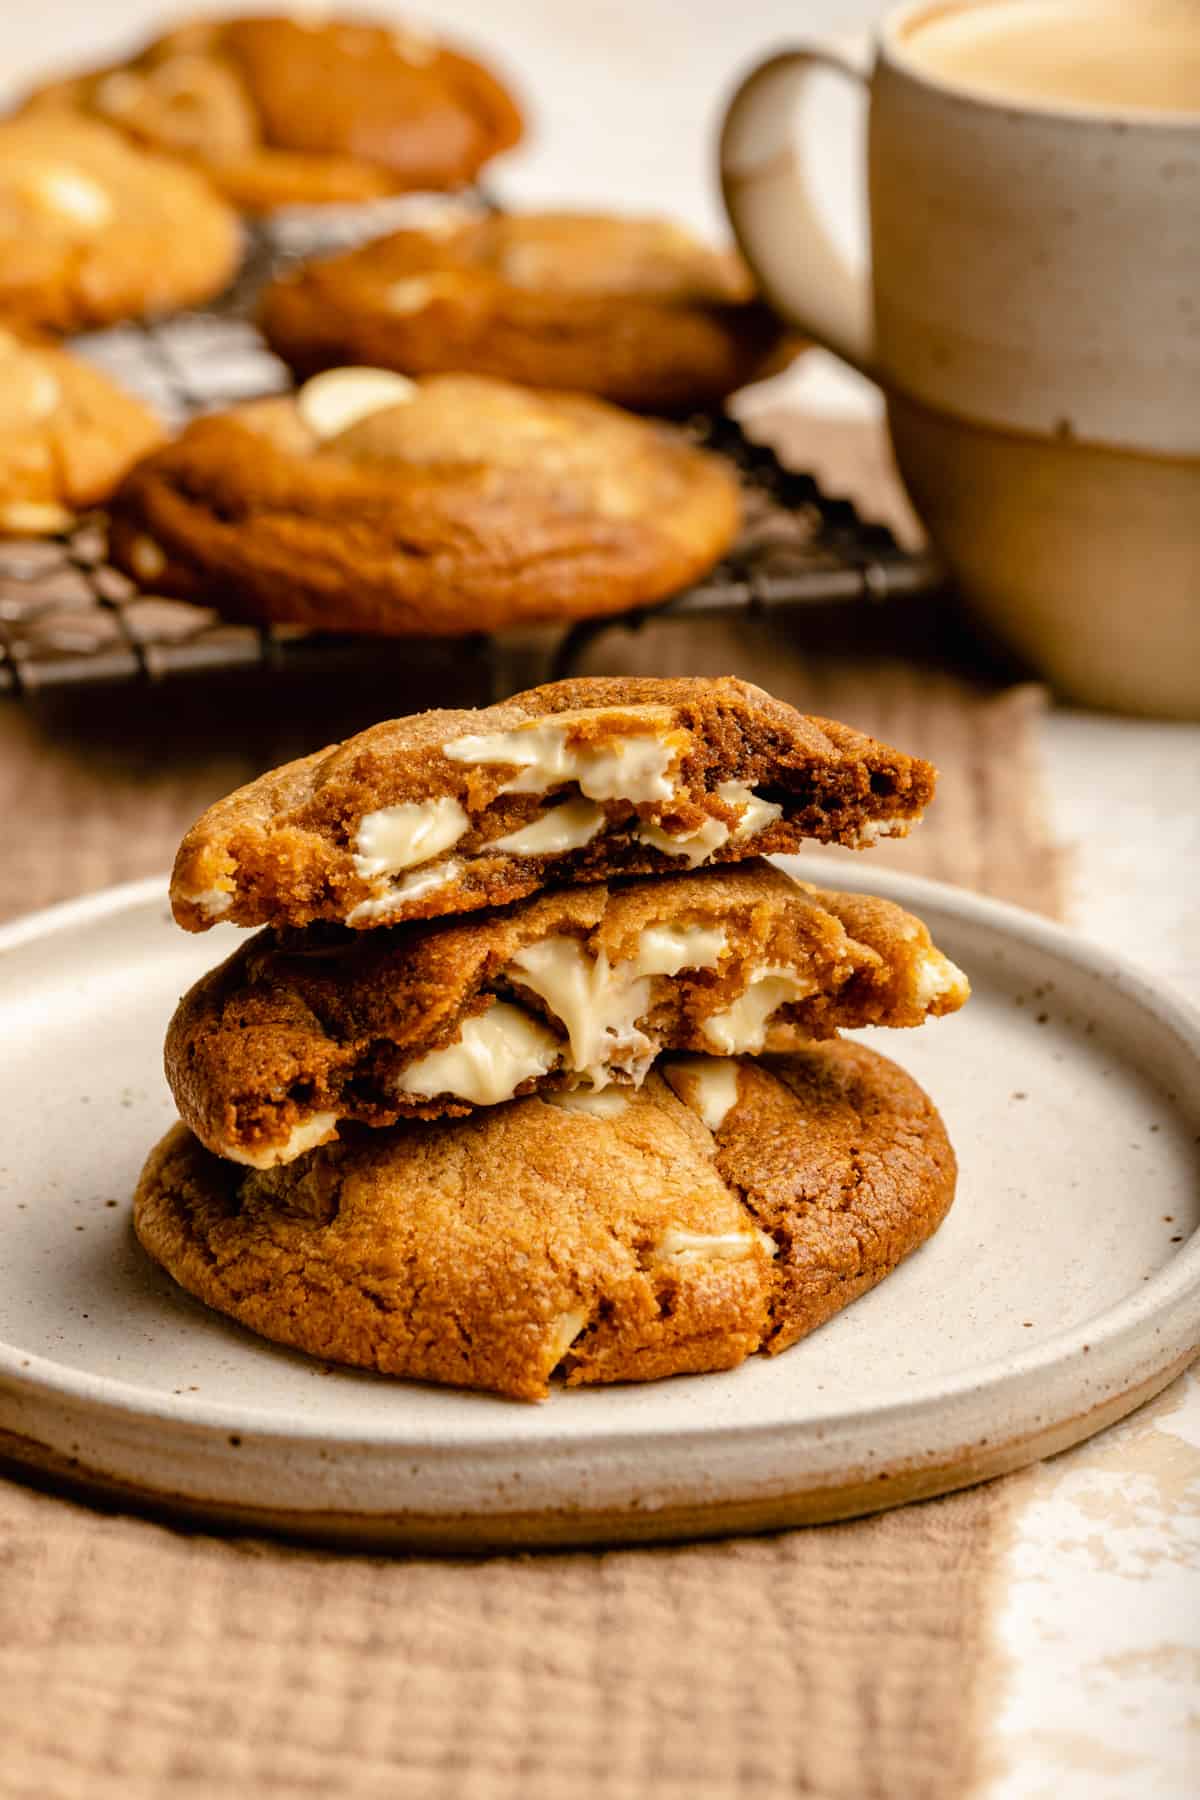 A gingerbread swirl cookie broken in half on top of another cookies on a plate showing the chewy insides and molten chocolate buttons.